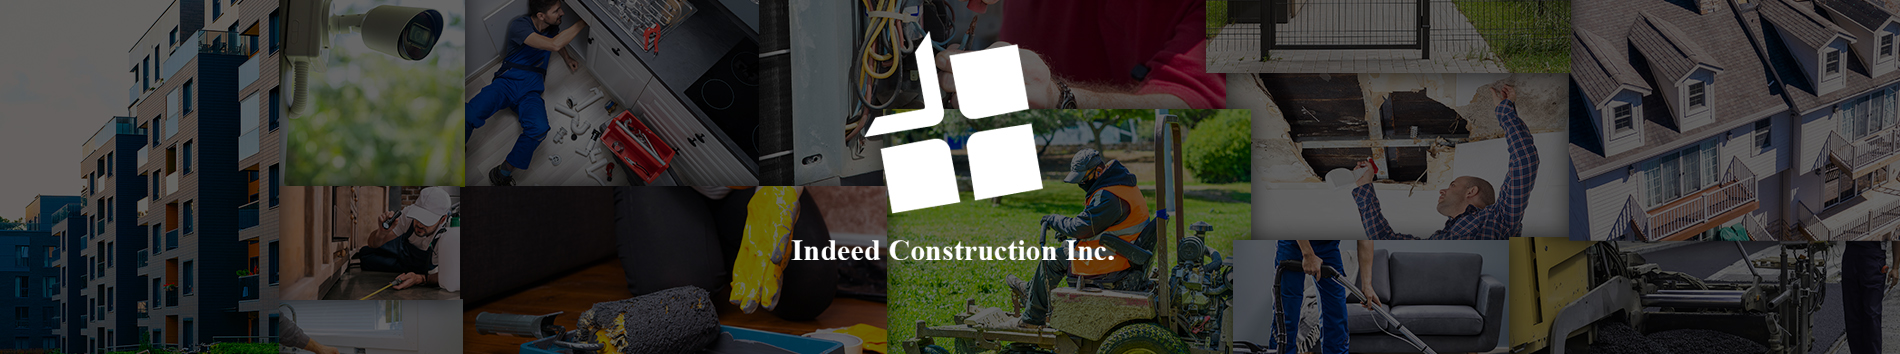 Indeed Construction Inc